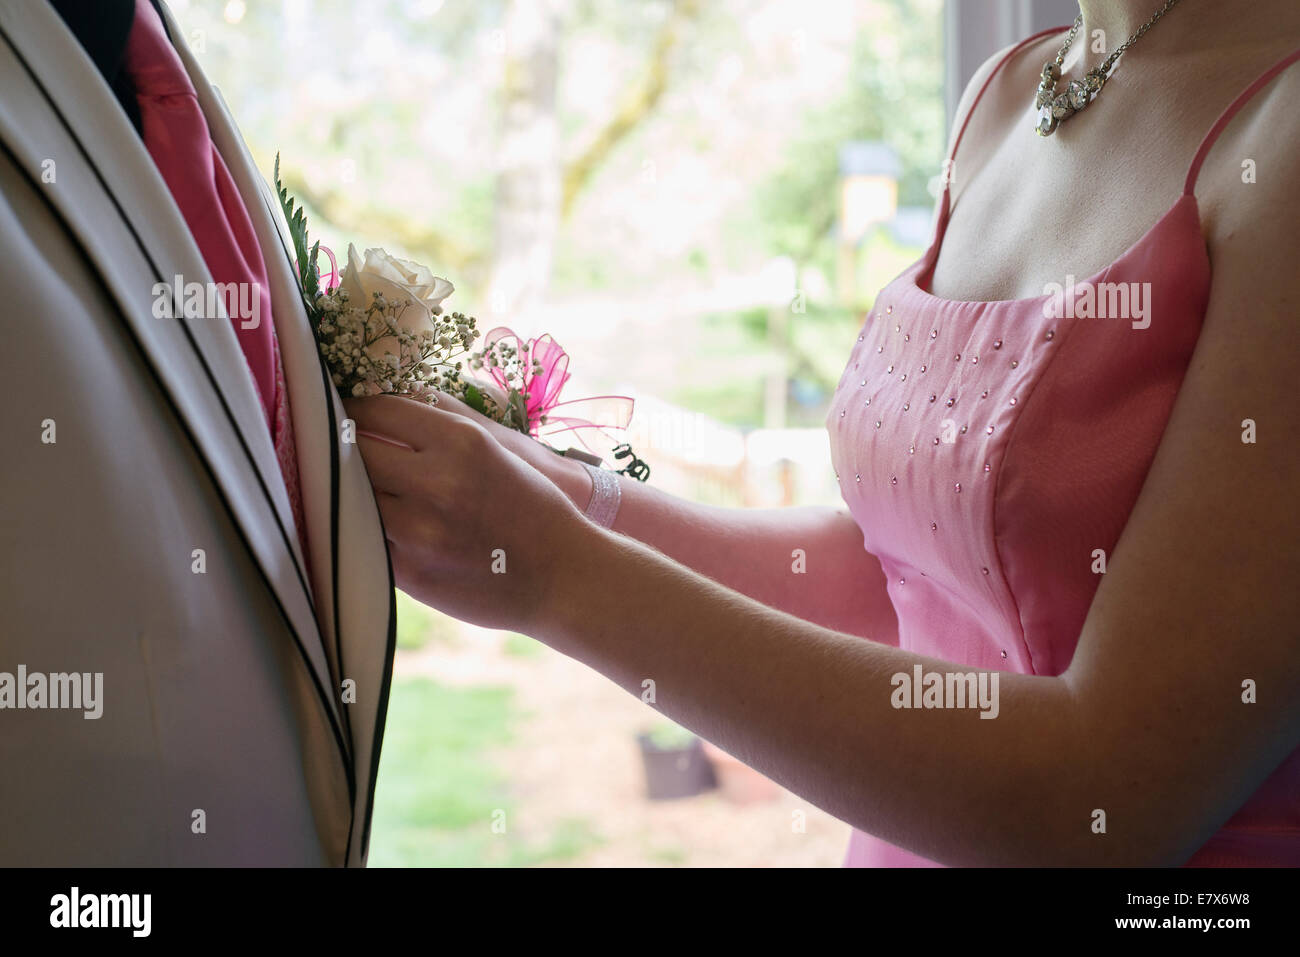 A girl pinning a Boutineer on her prom date. Stock Photo